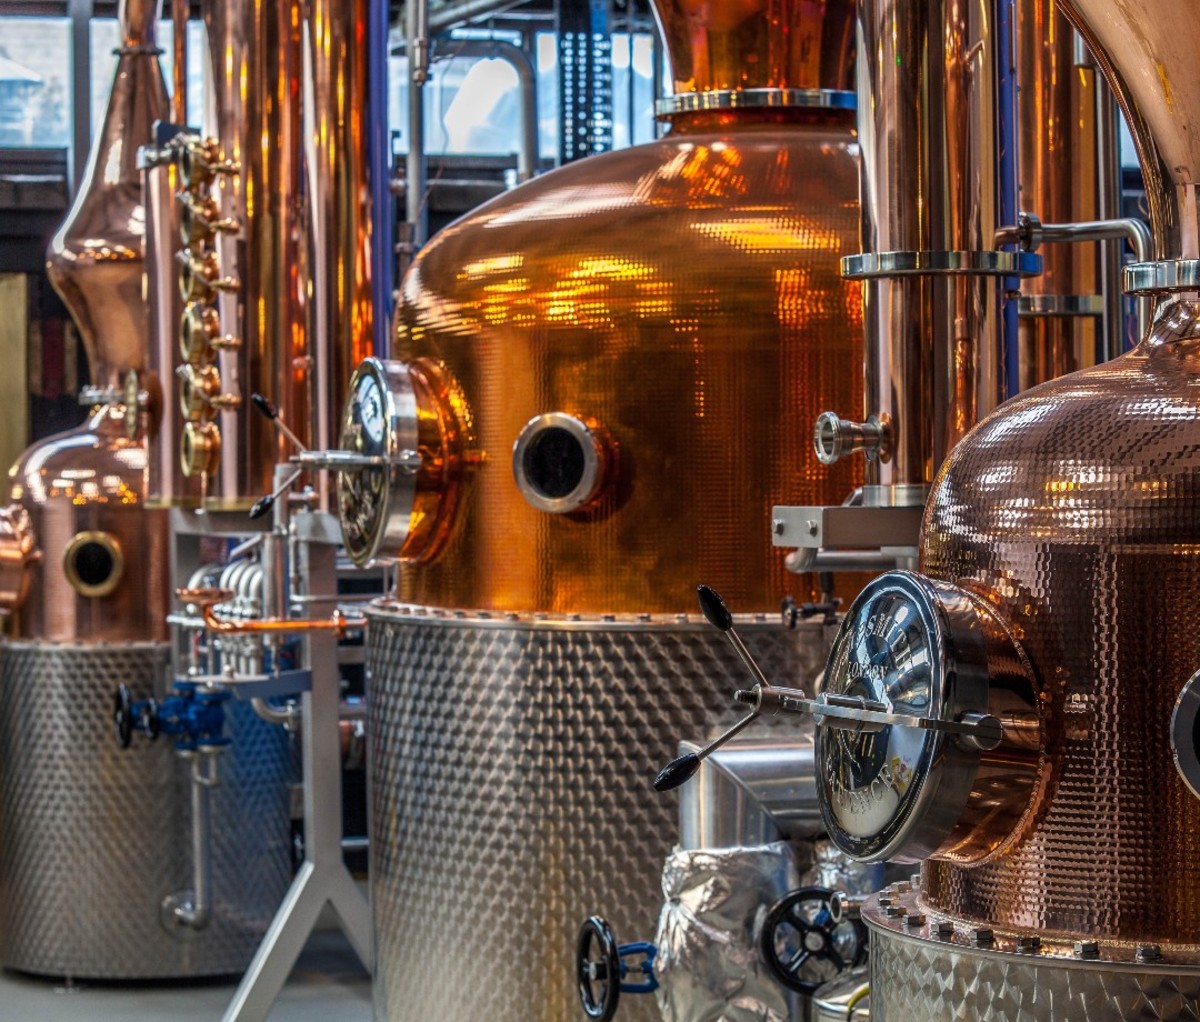 The Sipsmith Distillery in London